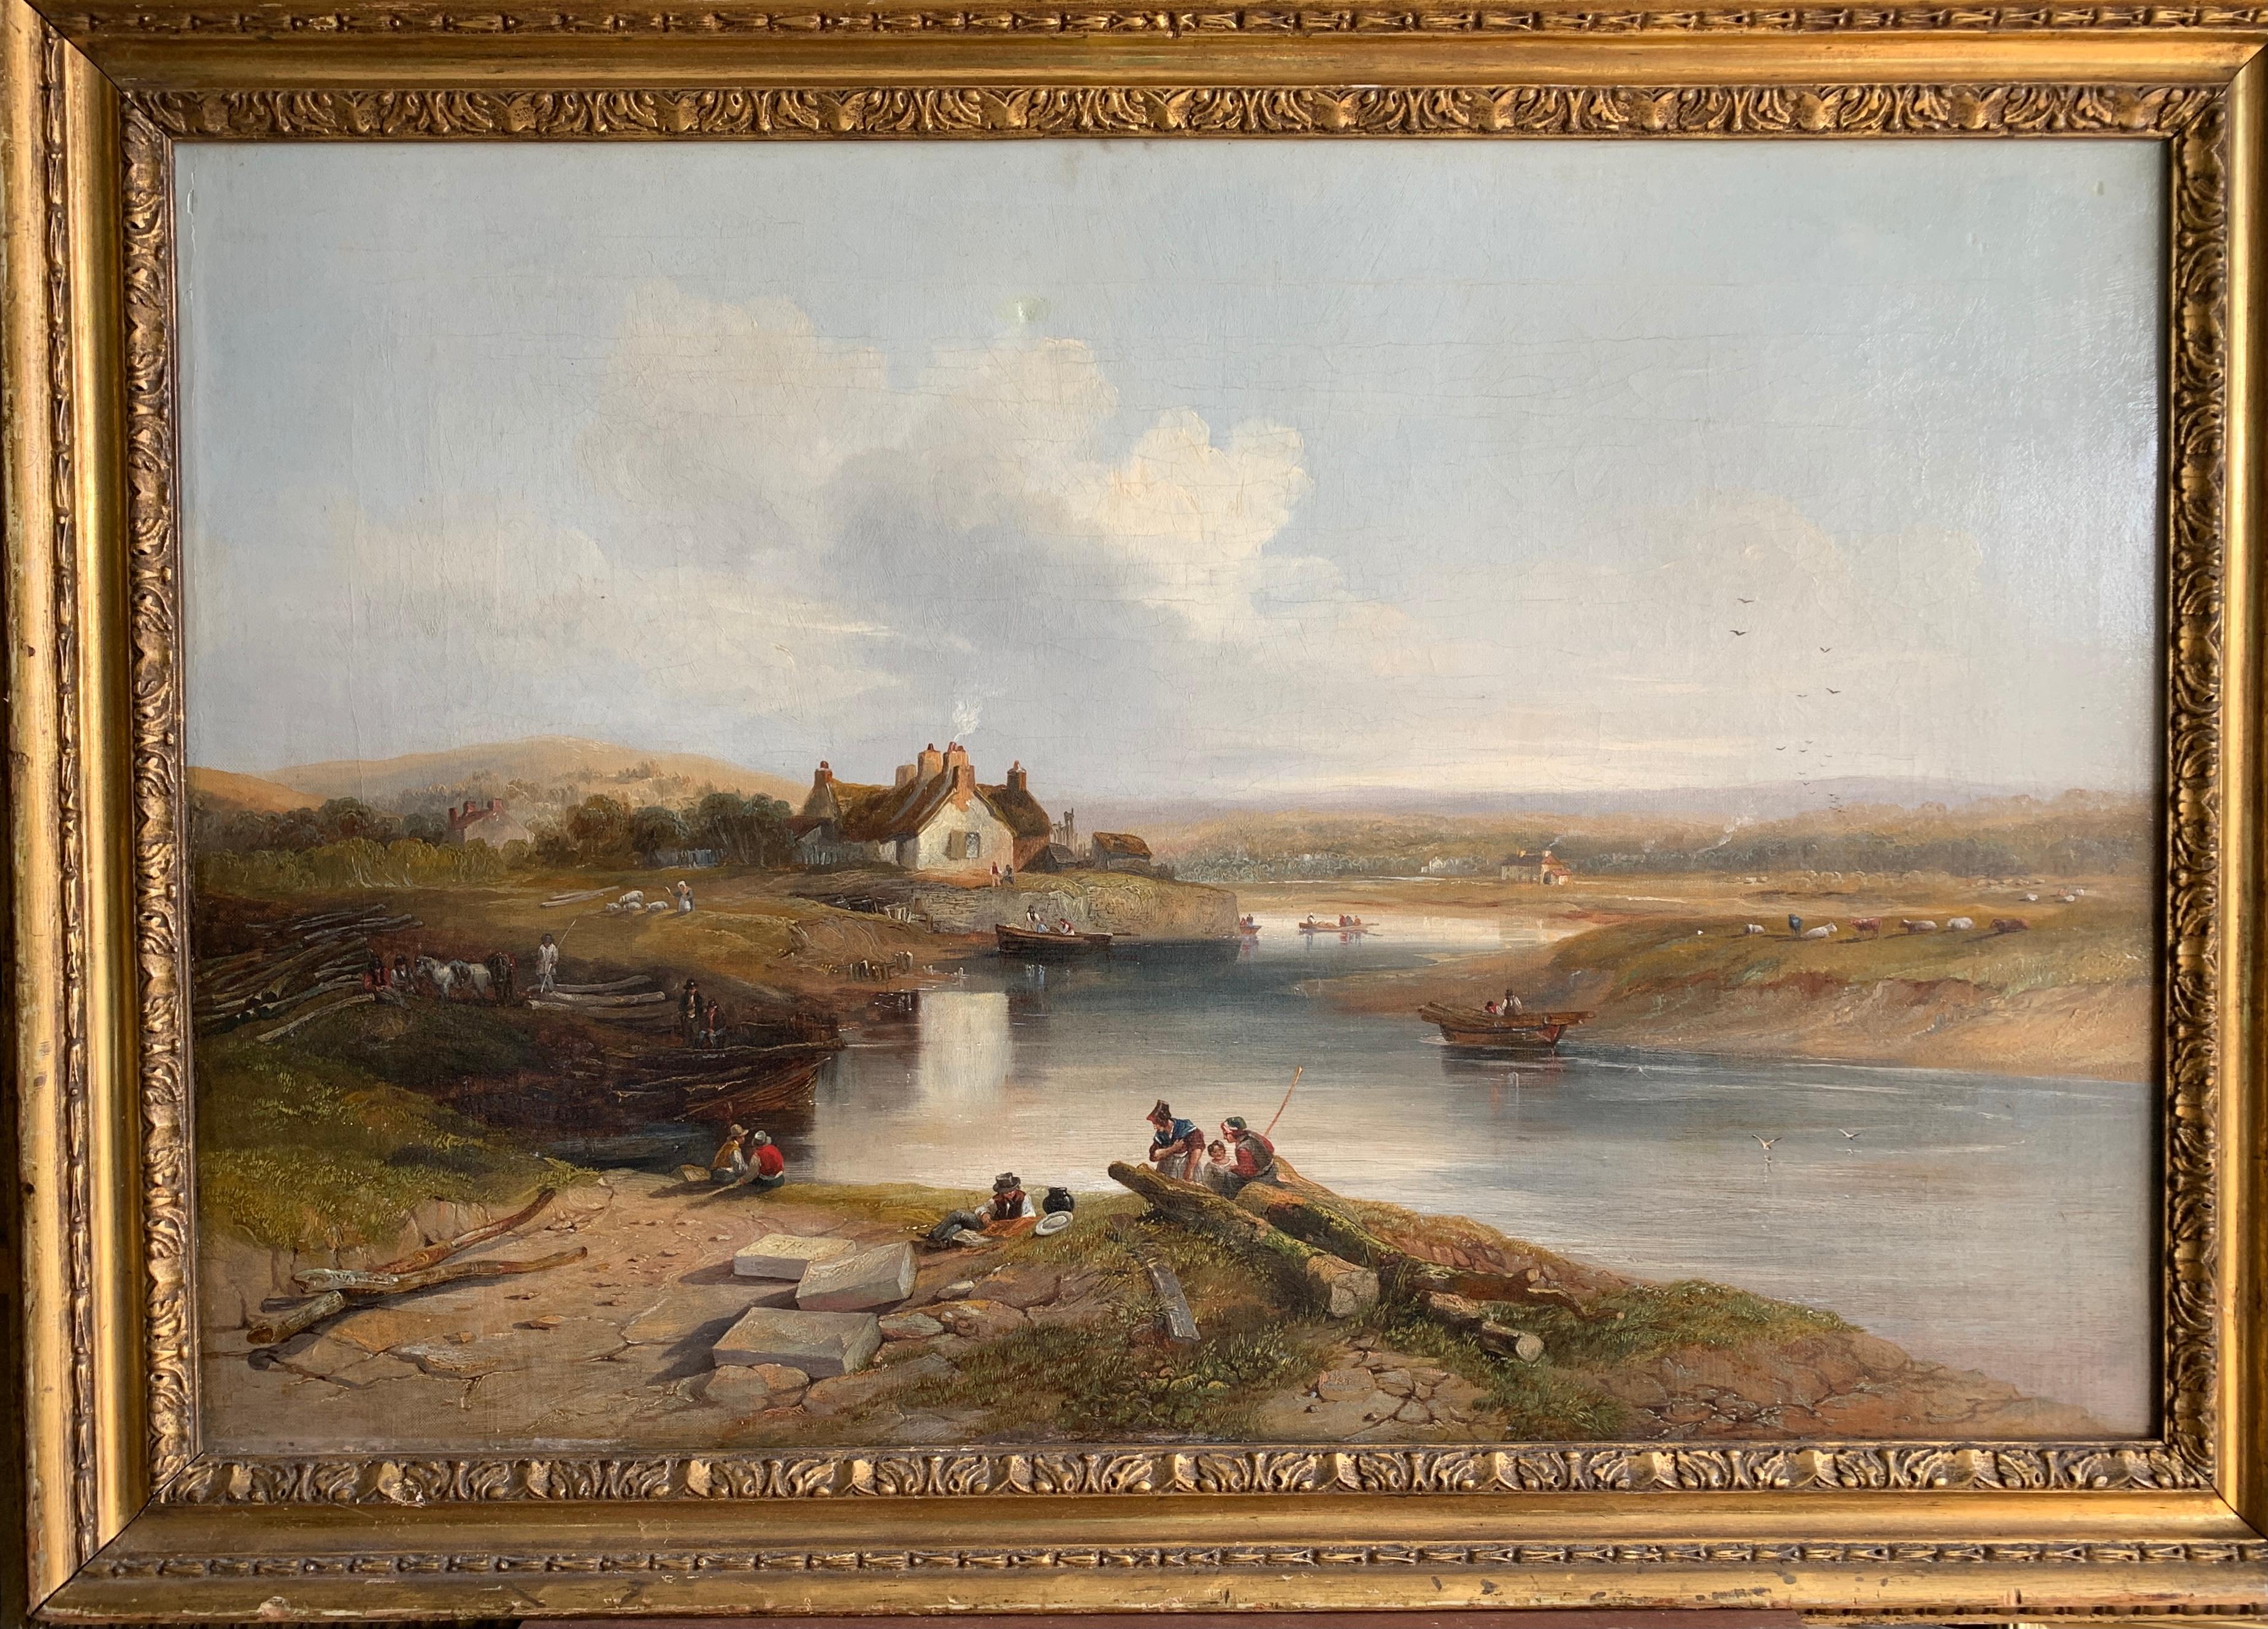 John Frederick Tennant Landscape Painting - 19th century English River landscape with figures, horses, cottage, sheep